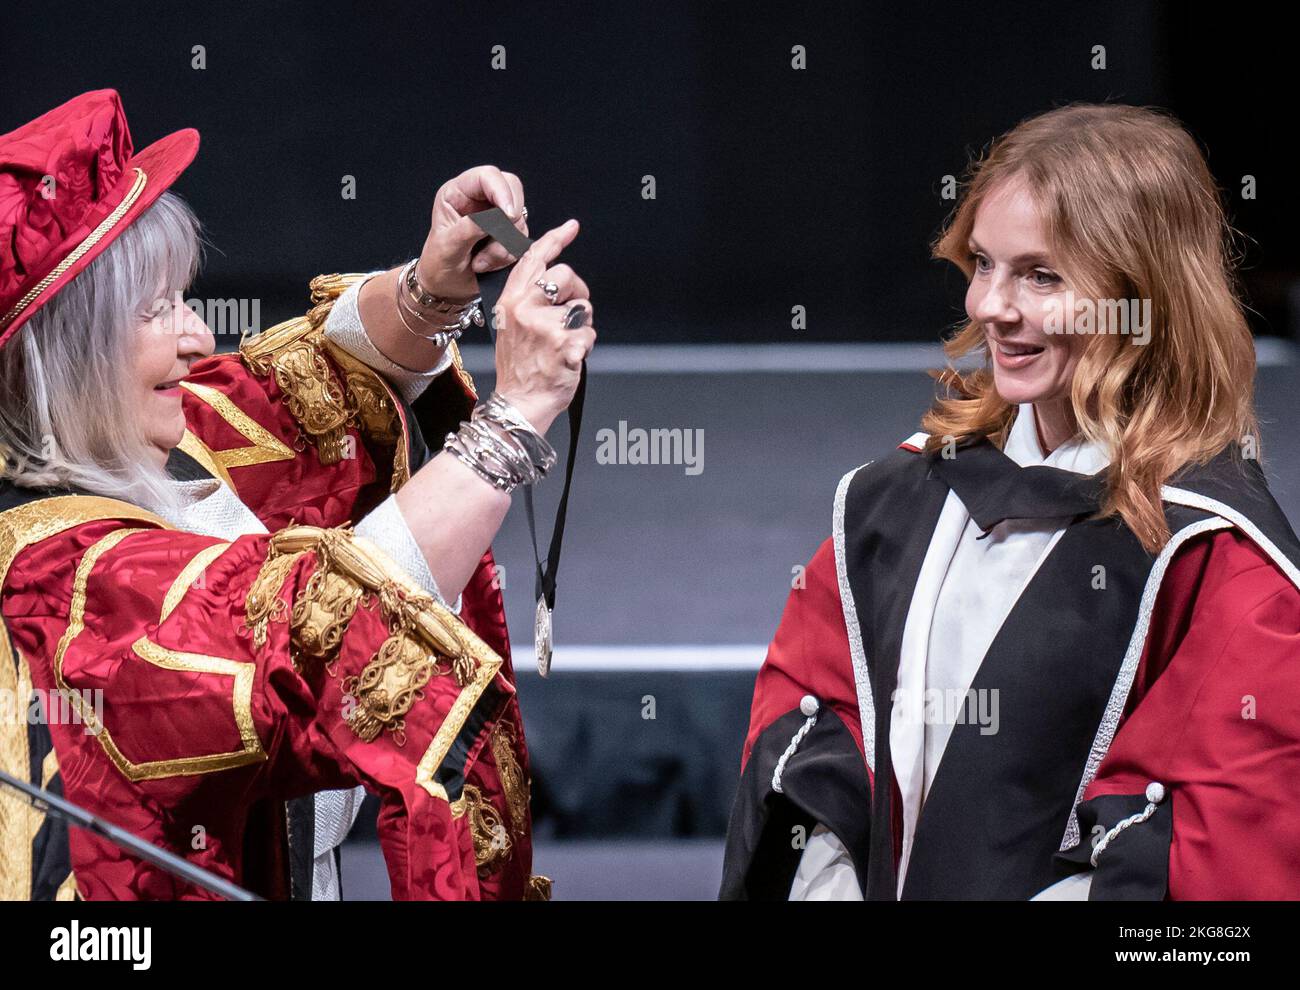 Chancellor of Sheffield Hallam University Baroness Helena Kennedy (left) presents Geri Halliwell-Horner (right) with an honorary doctorate from Sheffield Hallam University at Ponds Forge International Sports Centre in Sheffield. Picture date: Tuesday November 22, 2022. Stock Photo